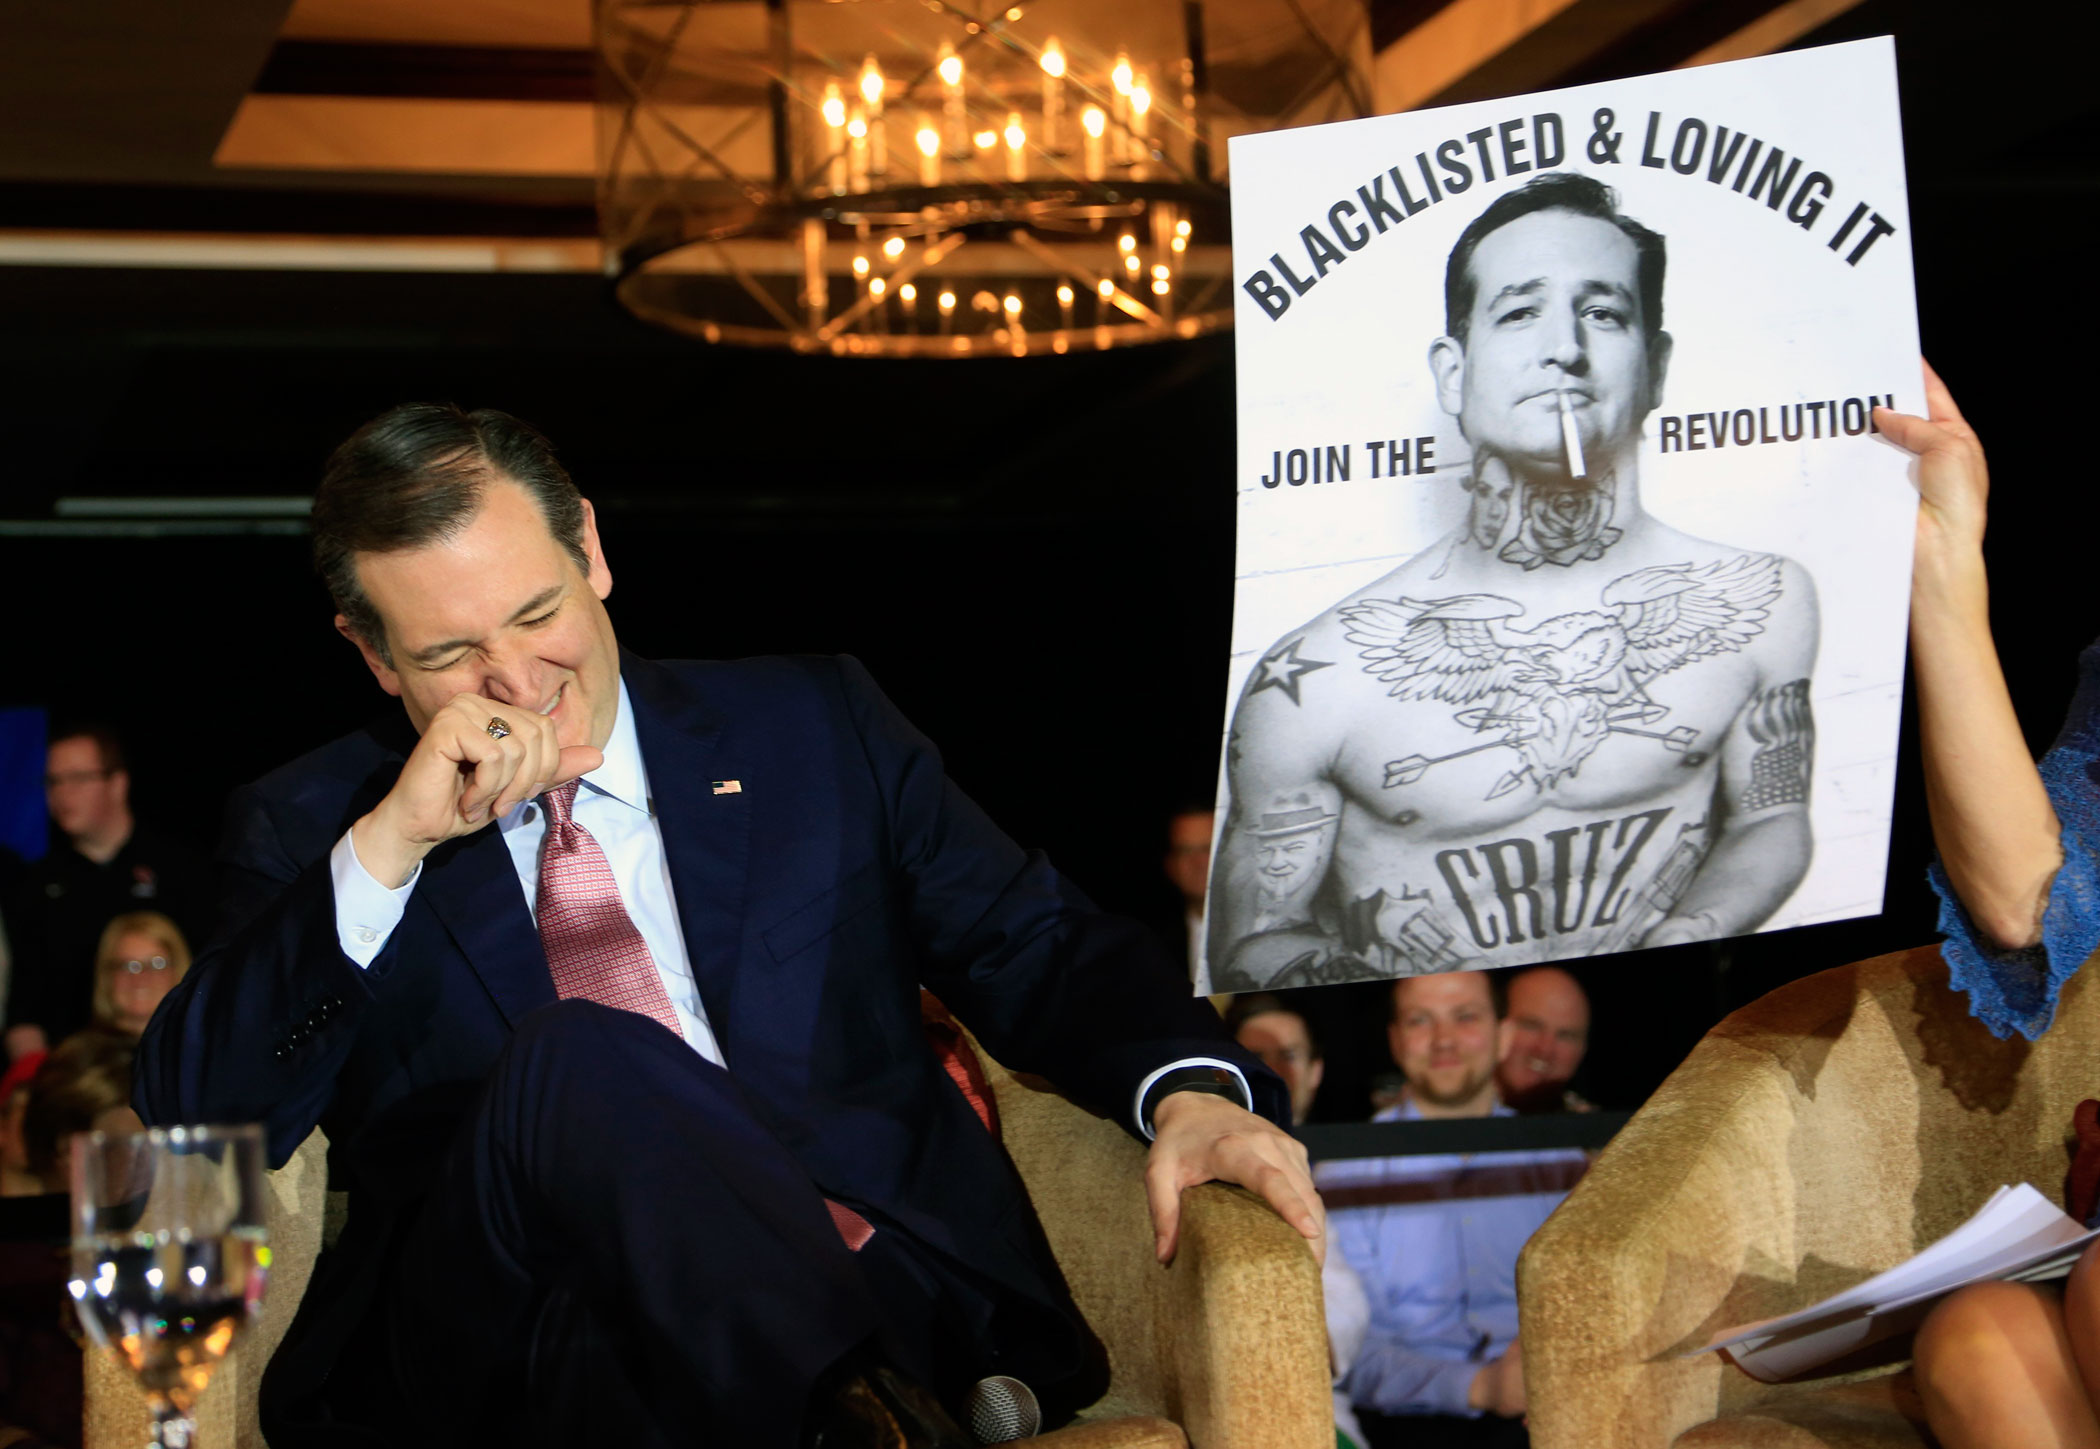 Republican presidential candidate, Texas Sen. Ted Cruz laughs at a poster in his likeness at a town hall event on March 30, 2016 in Madison, Wis.